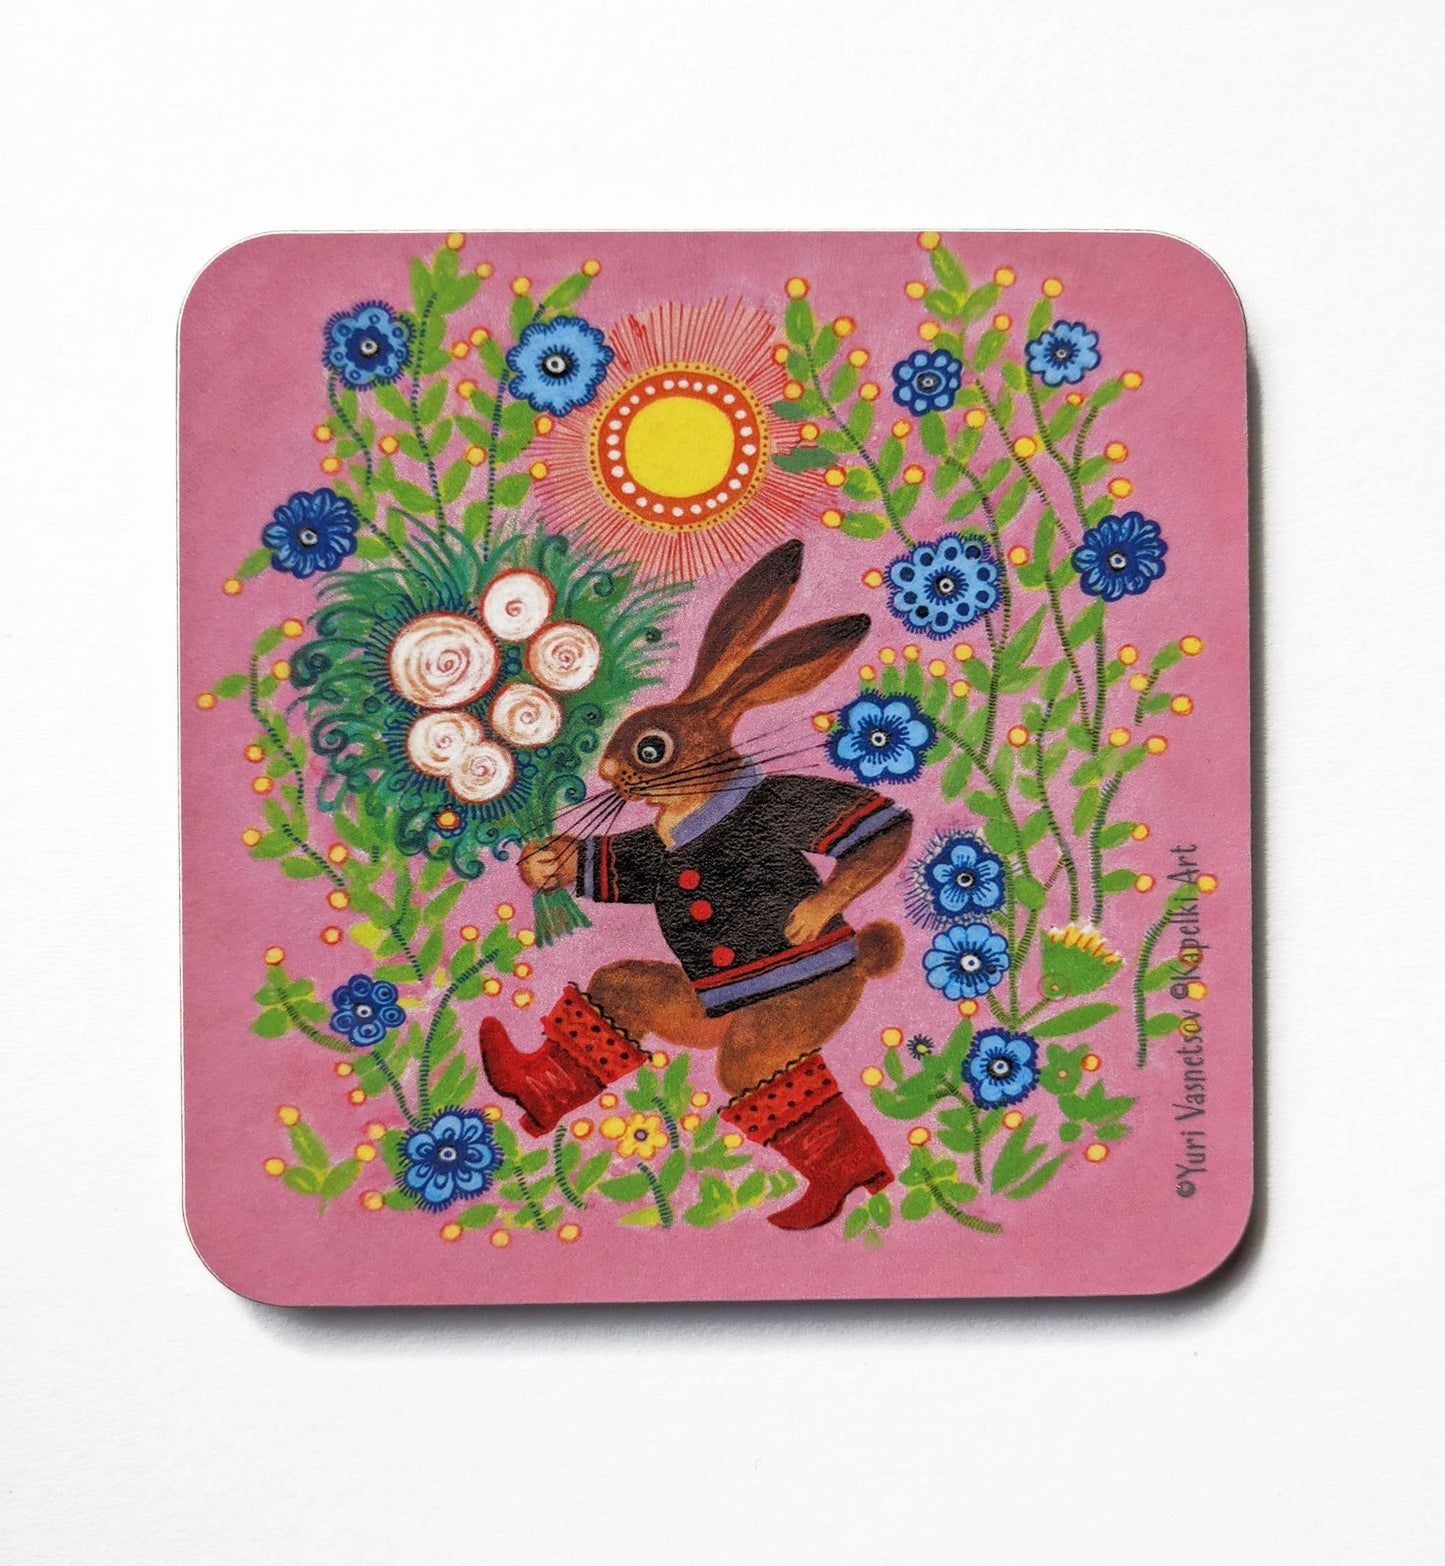 Bunny in Boots Cork Coaster